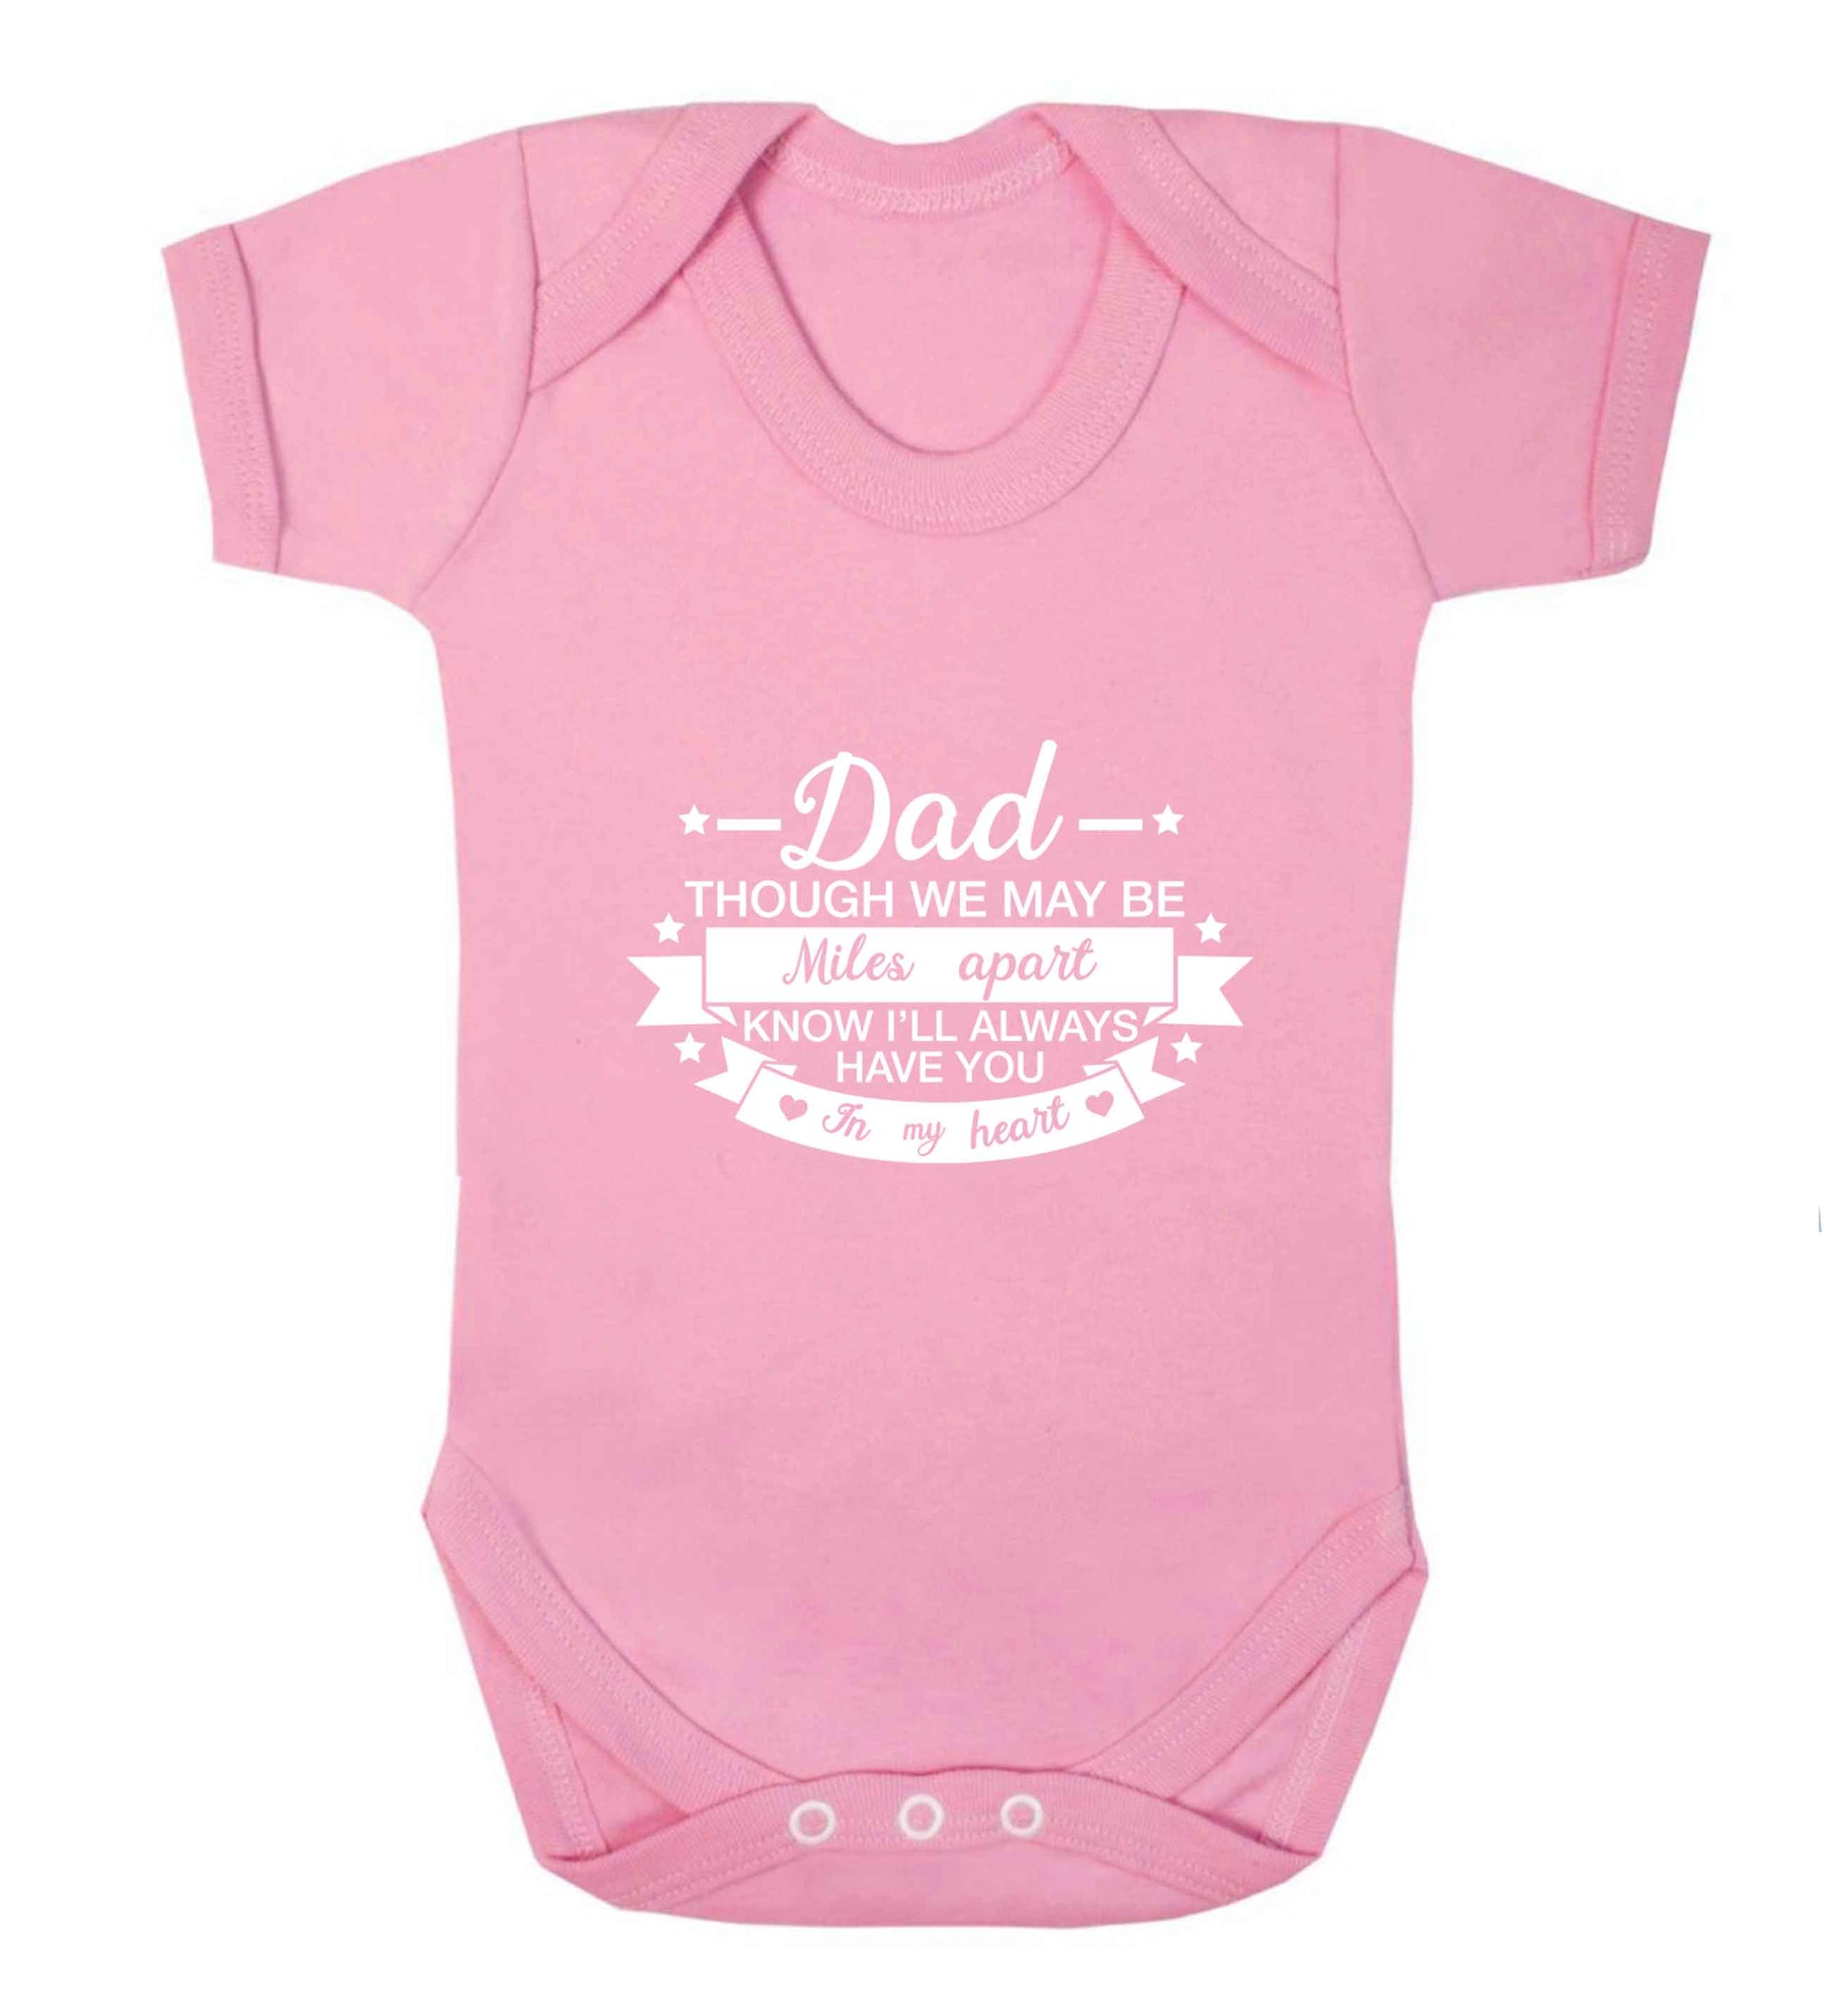 Dad though we are miles apart know I'll always have you in my heart baby vest pale pink 18-24 months